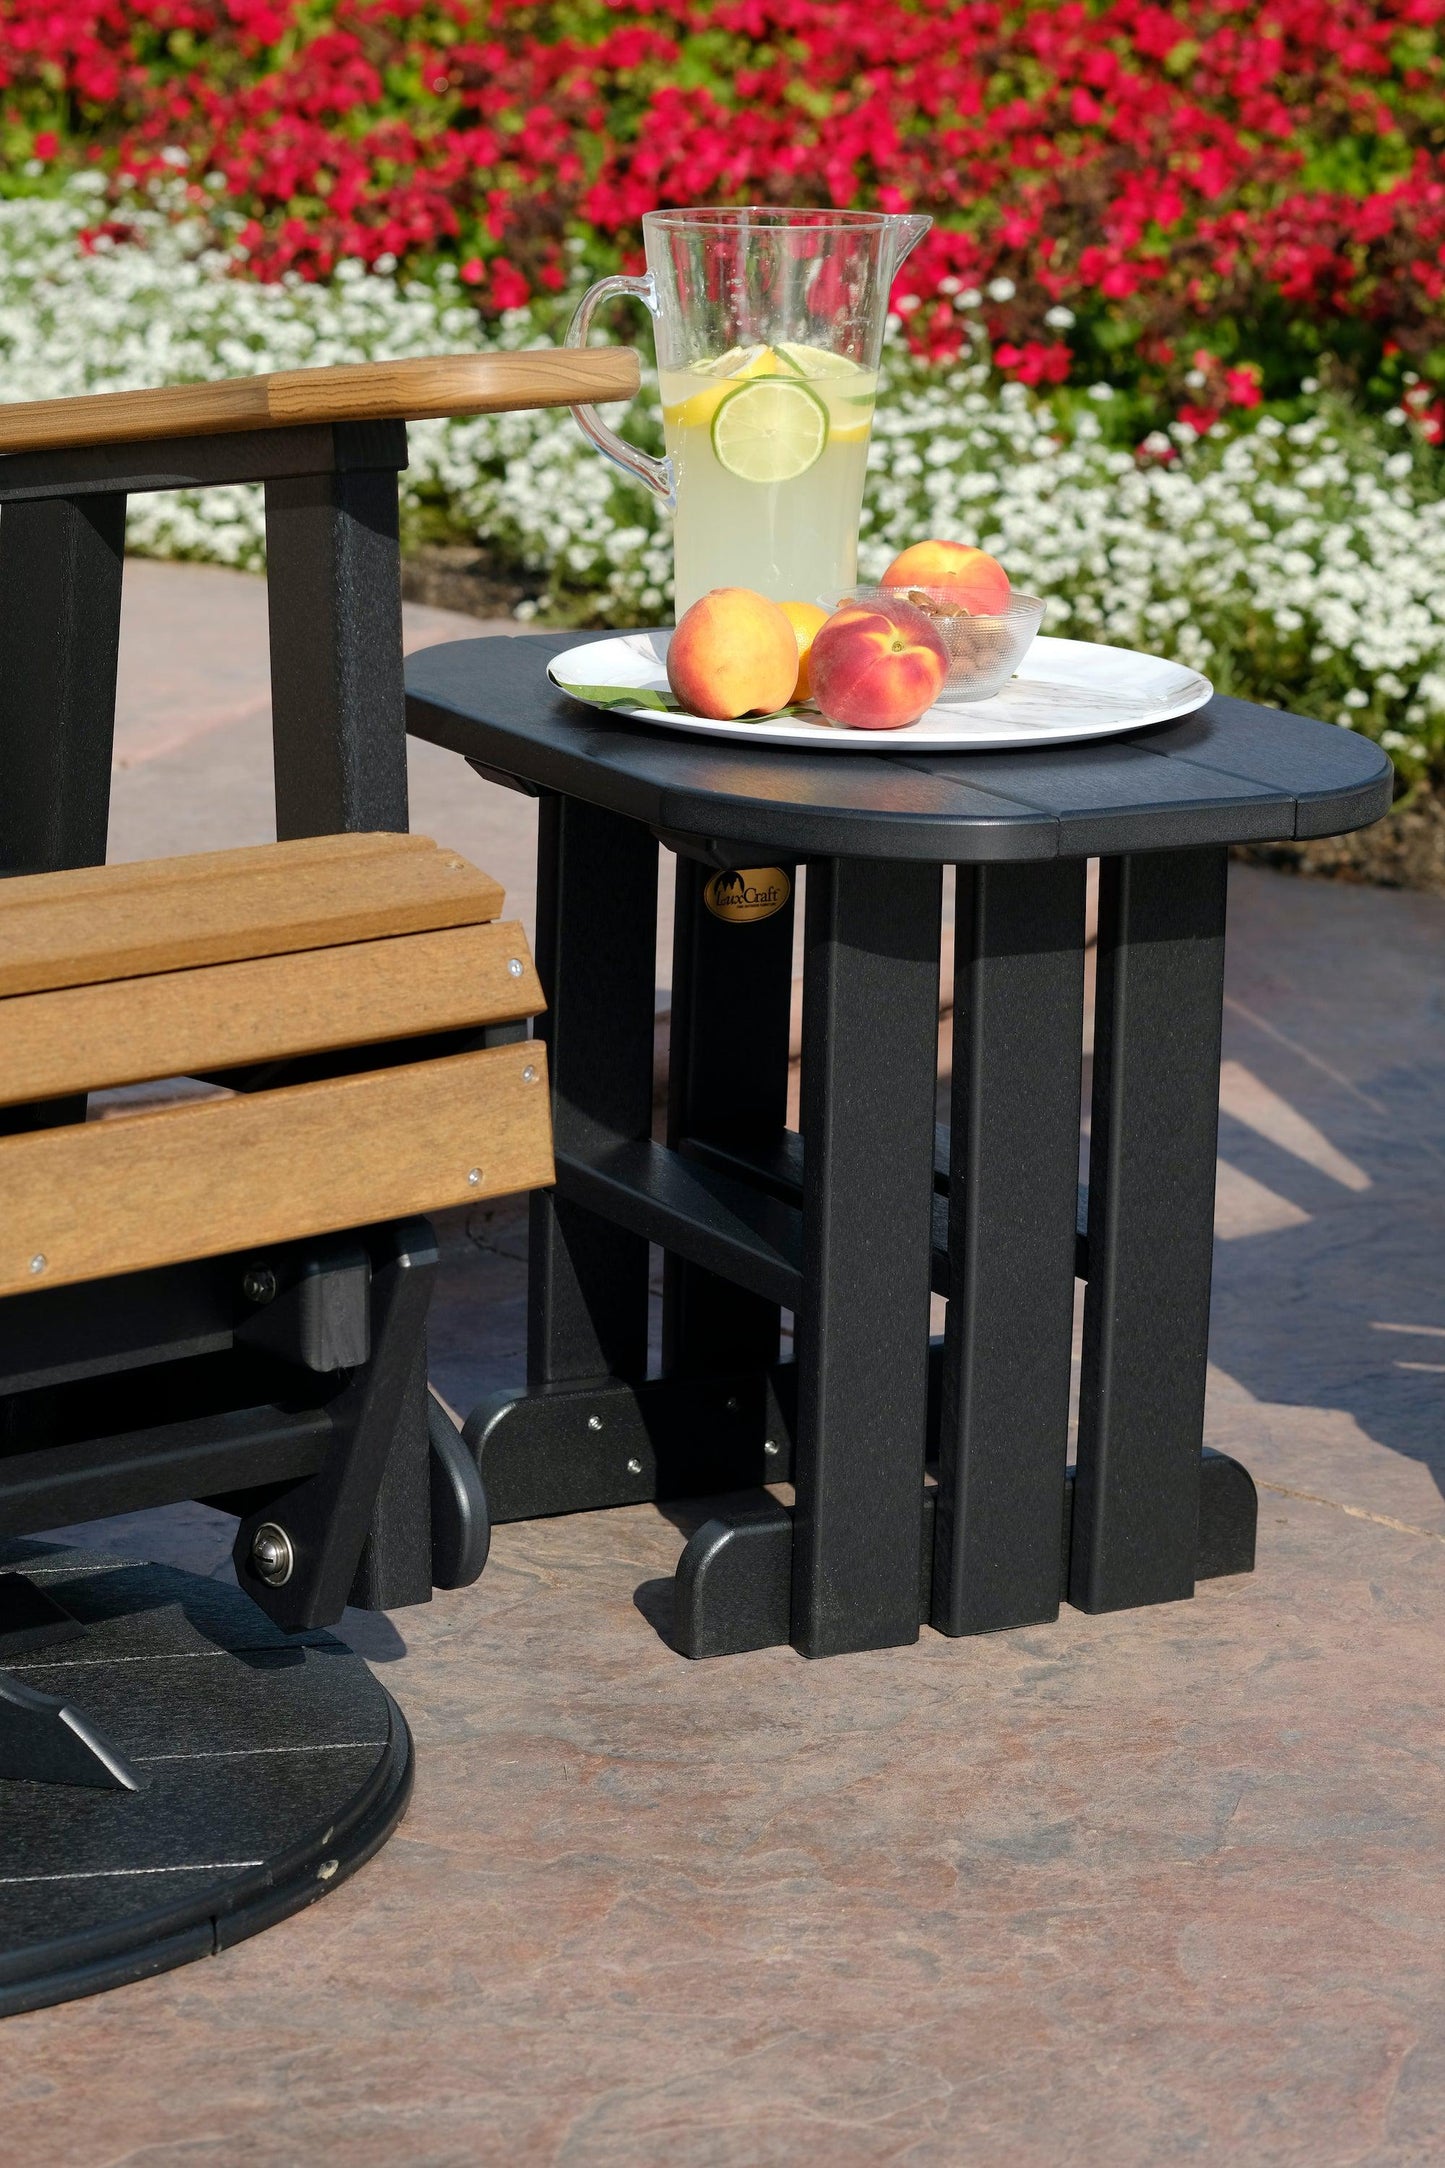 LuxCraft Recycled Plastic End Table  - LEAD TIME TO SHIP 10 to 12 BUSINESS DAYS